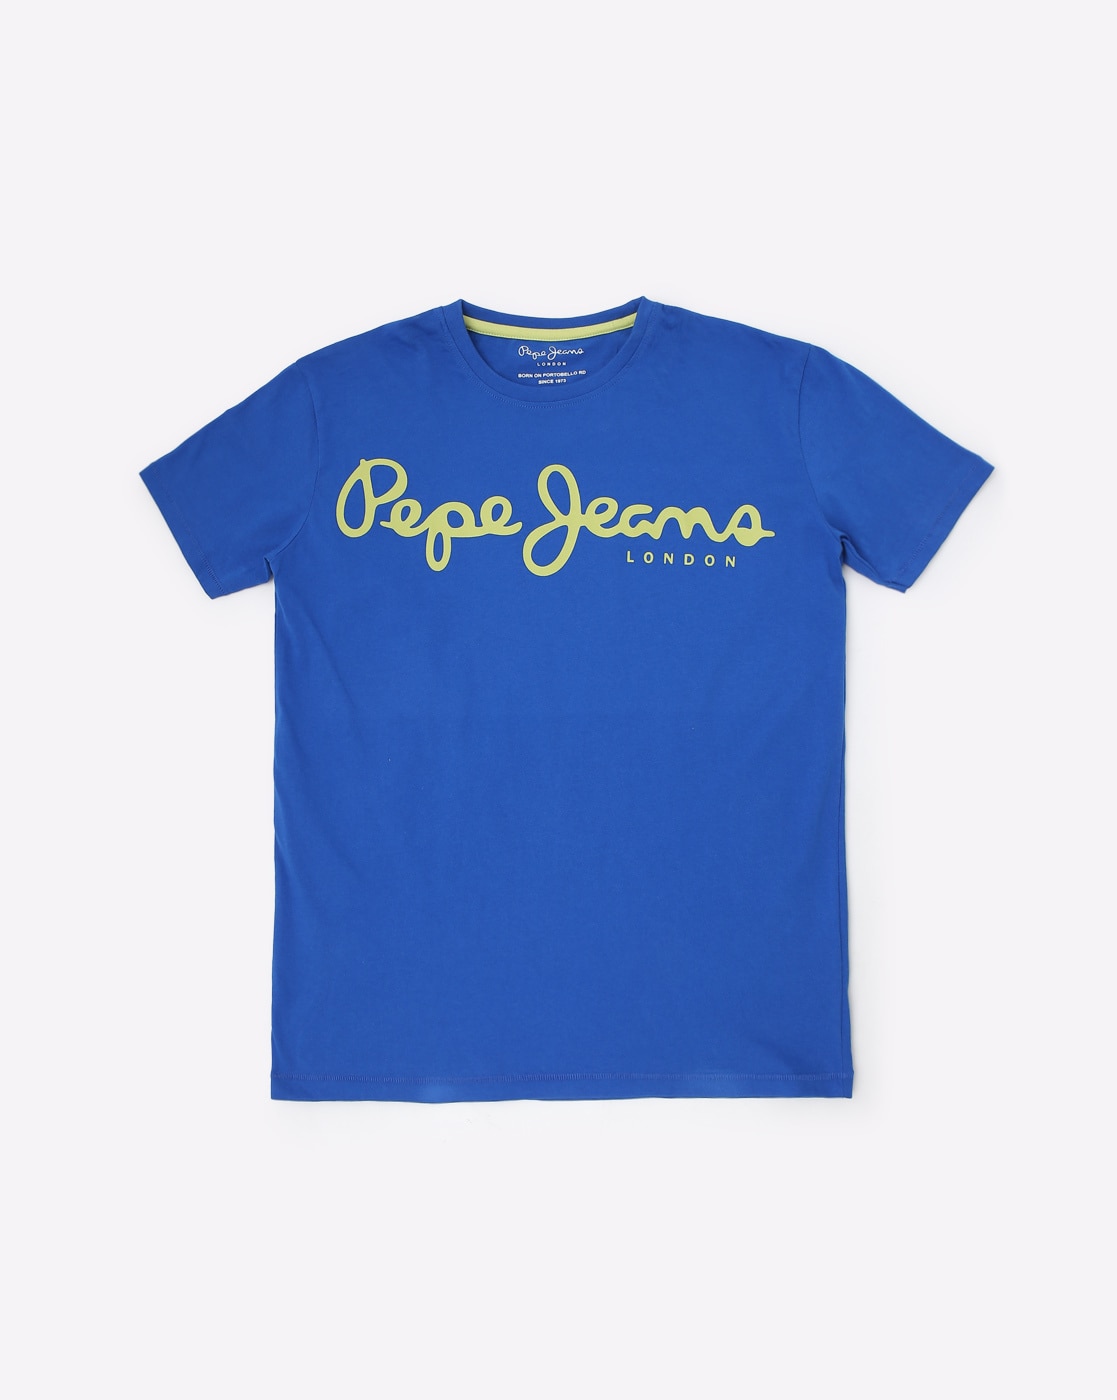 Buy Blue Pepe Online Tshirts by Boys Jeans for